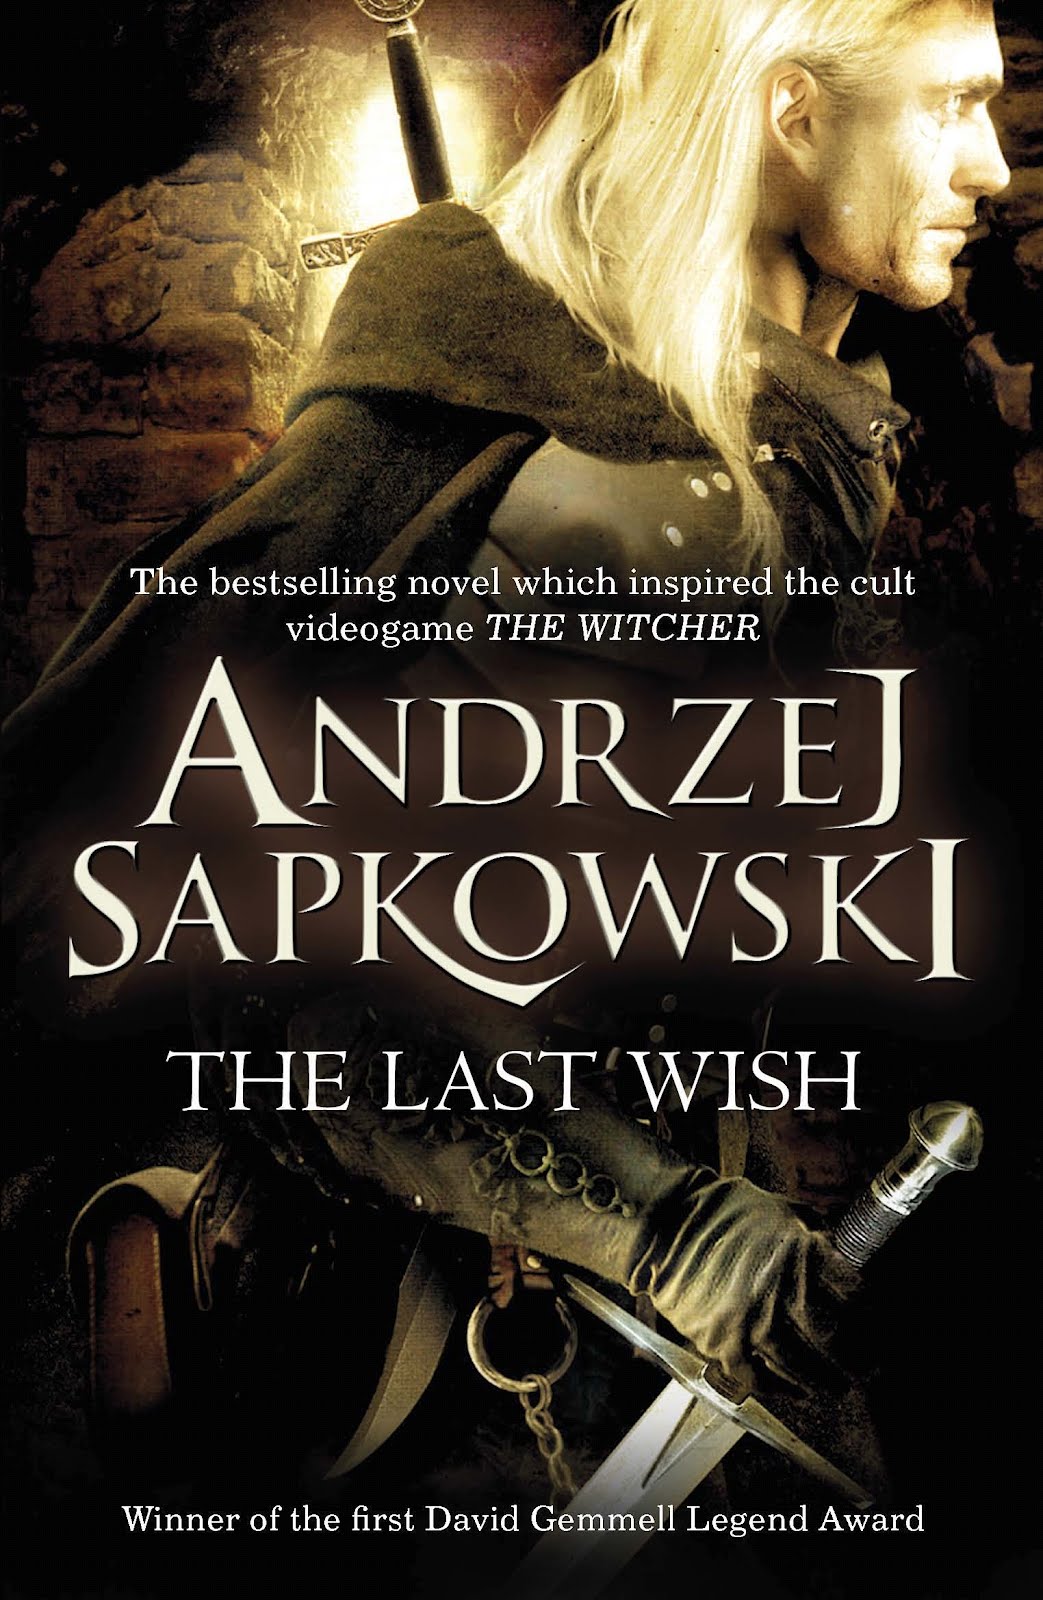 The Witcher: Nightmare of the Wolf – Wikipédia, a enciclopédia livre